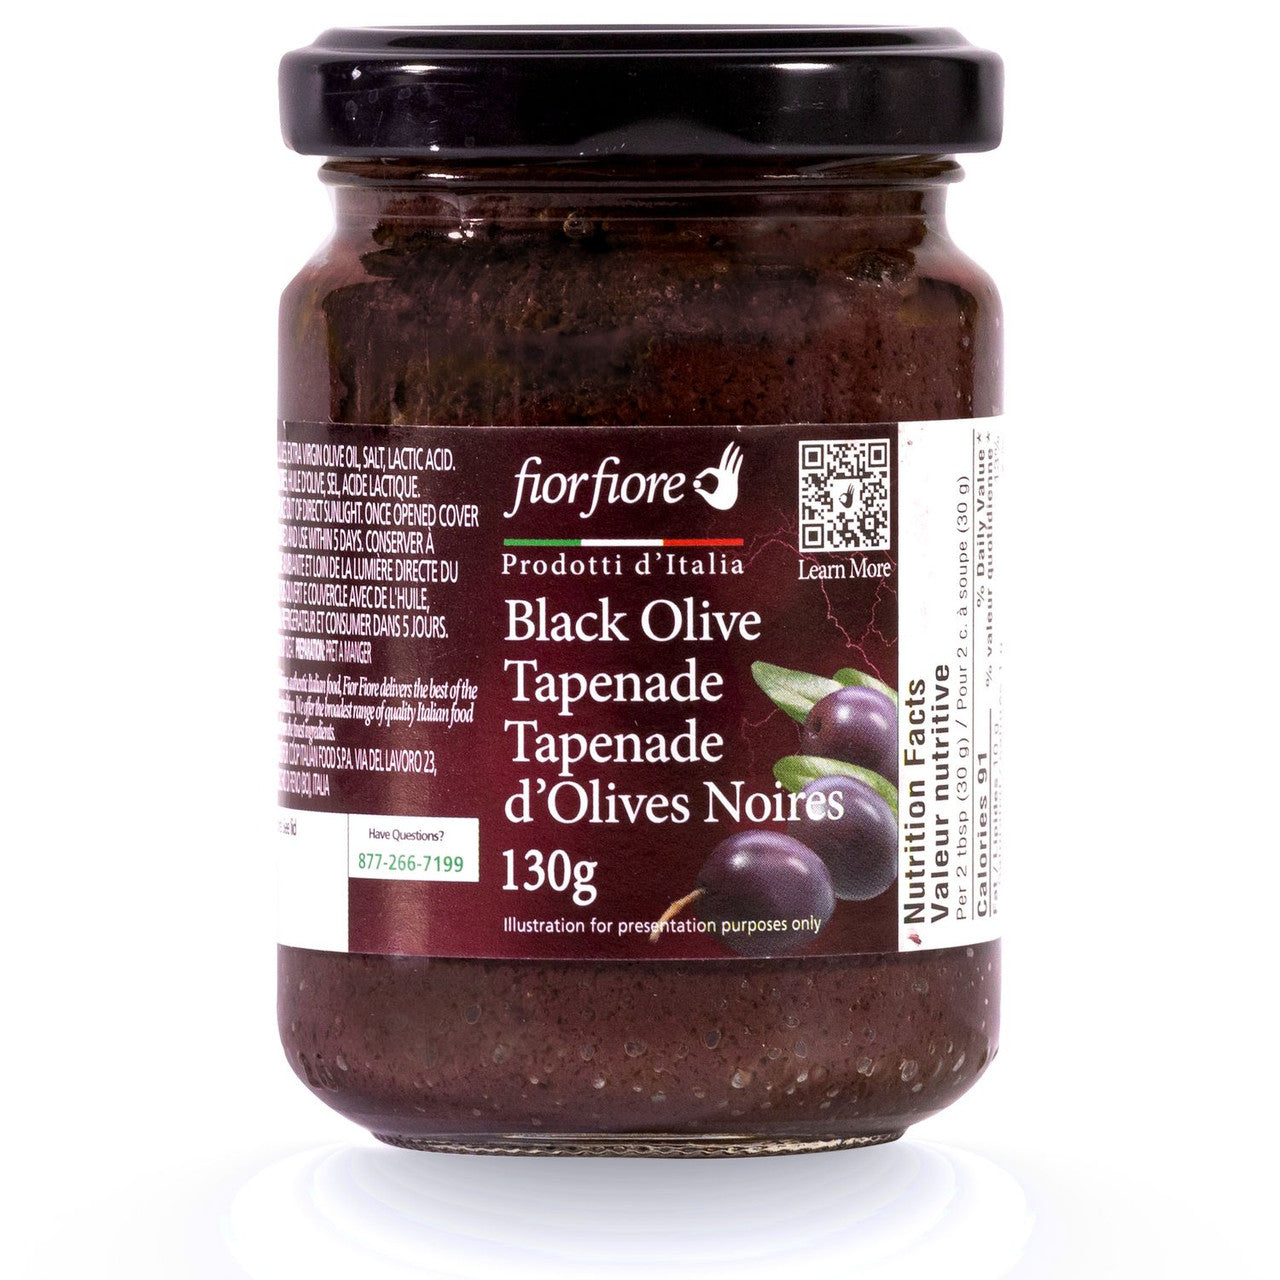 Fiorfiore Black Olive Tapenade Pate, 130g/4.6 oz., {Imported from Canada}